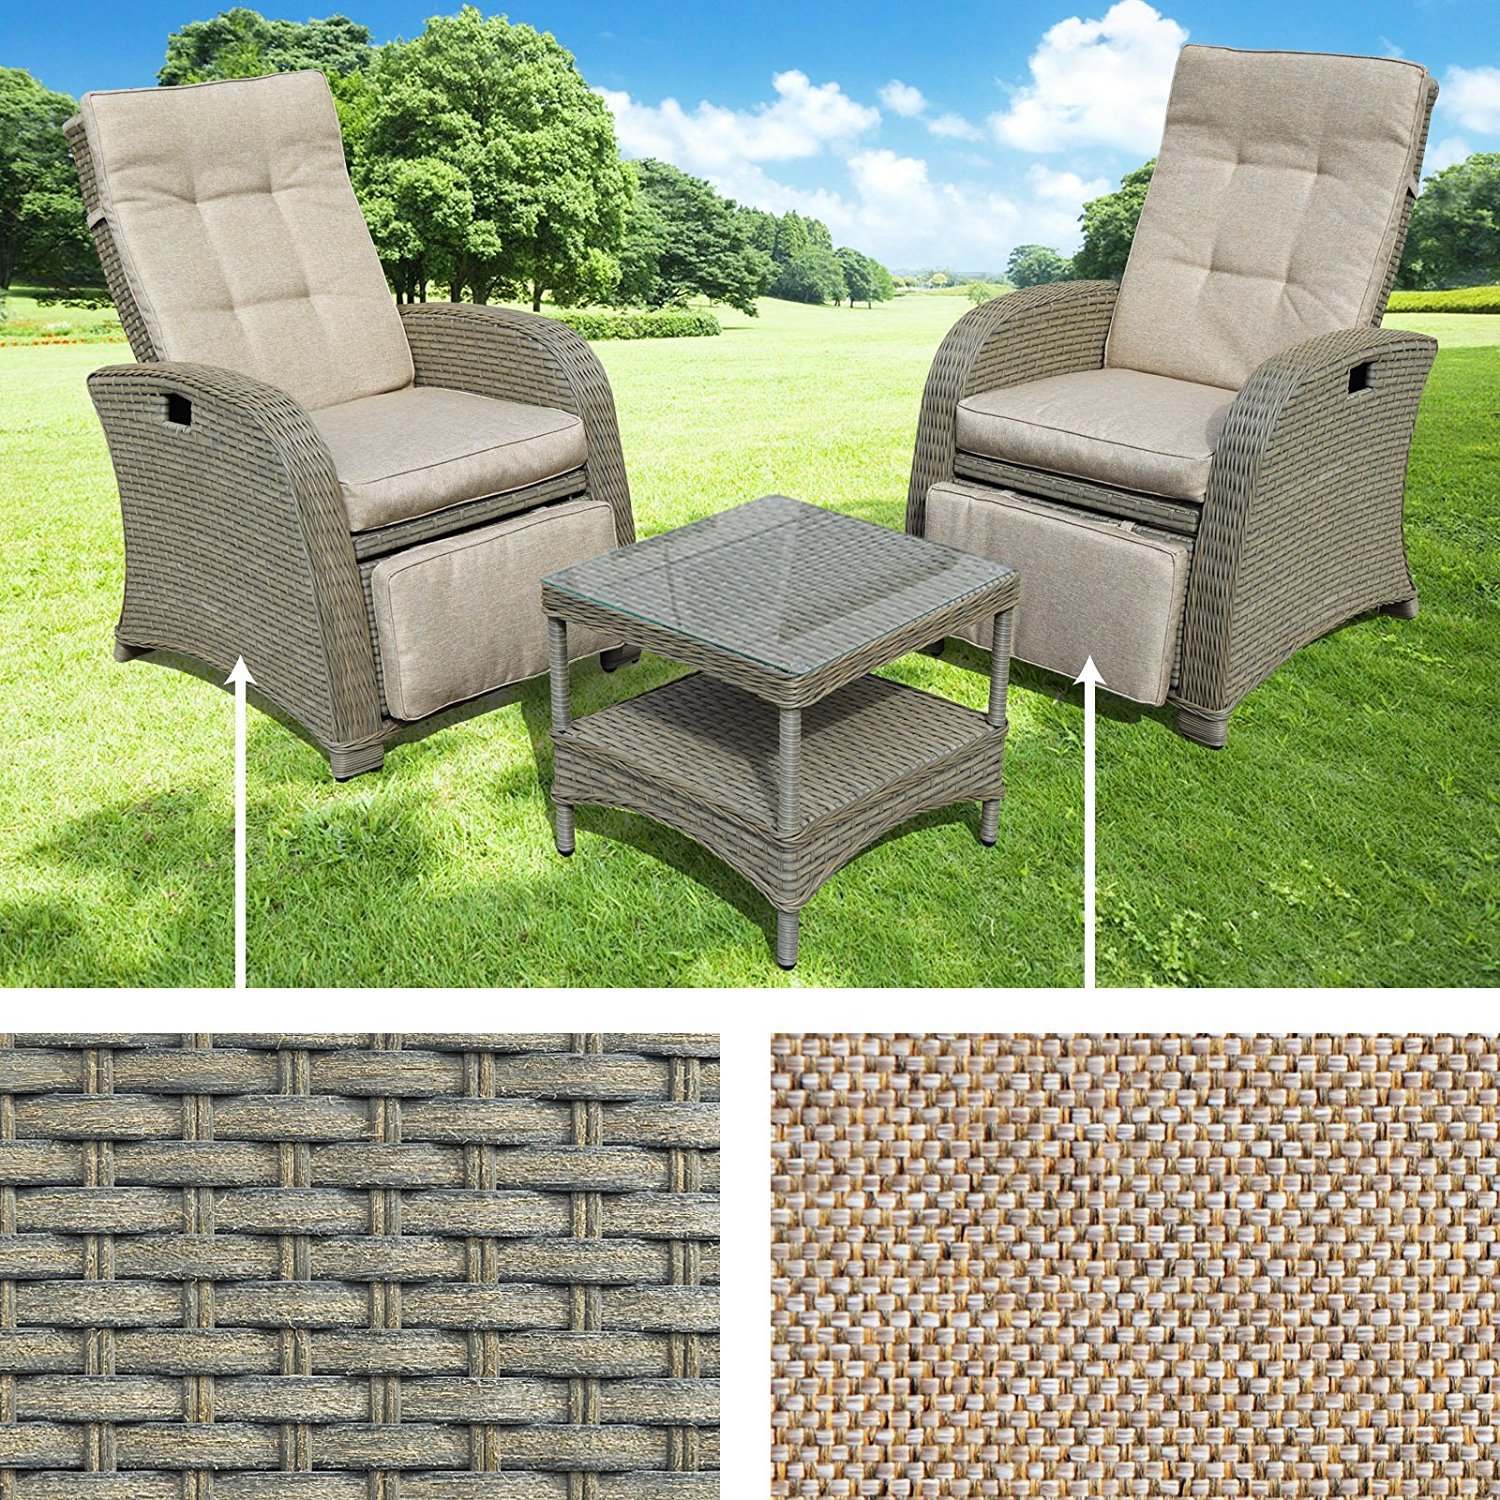 Sunny 3pcs Wicker Rattan Lounge Table & Chair Set Patio Furniture Outdoor Garden With Cushion Seat - image 1 of 6